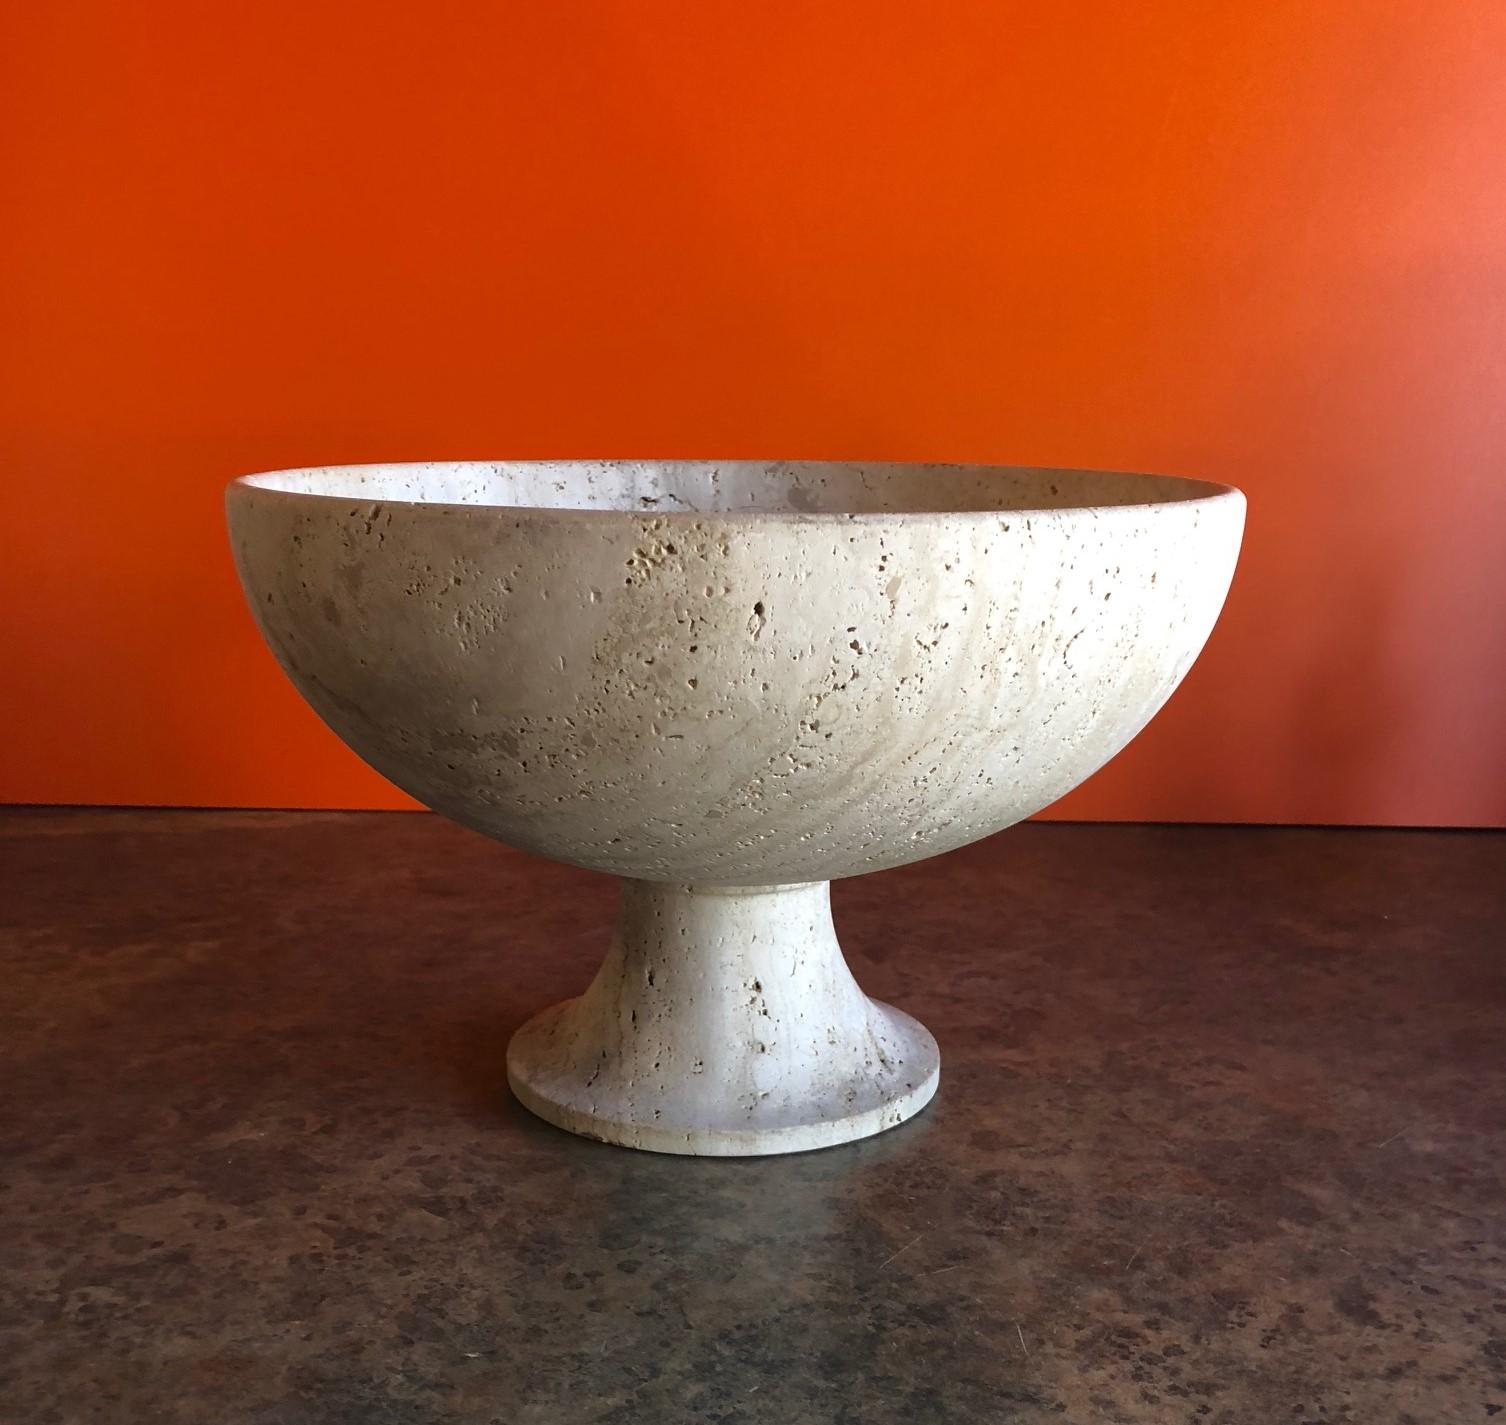 A very cool Mid-Century Modern travertine pedestal fruit bowl, circa 1970s. The bowl is 12